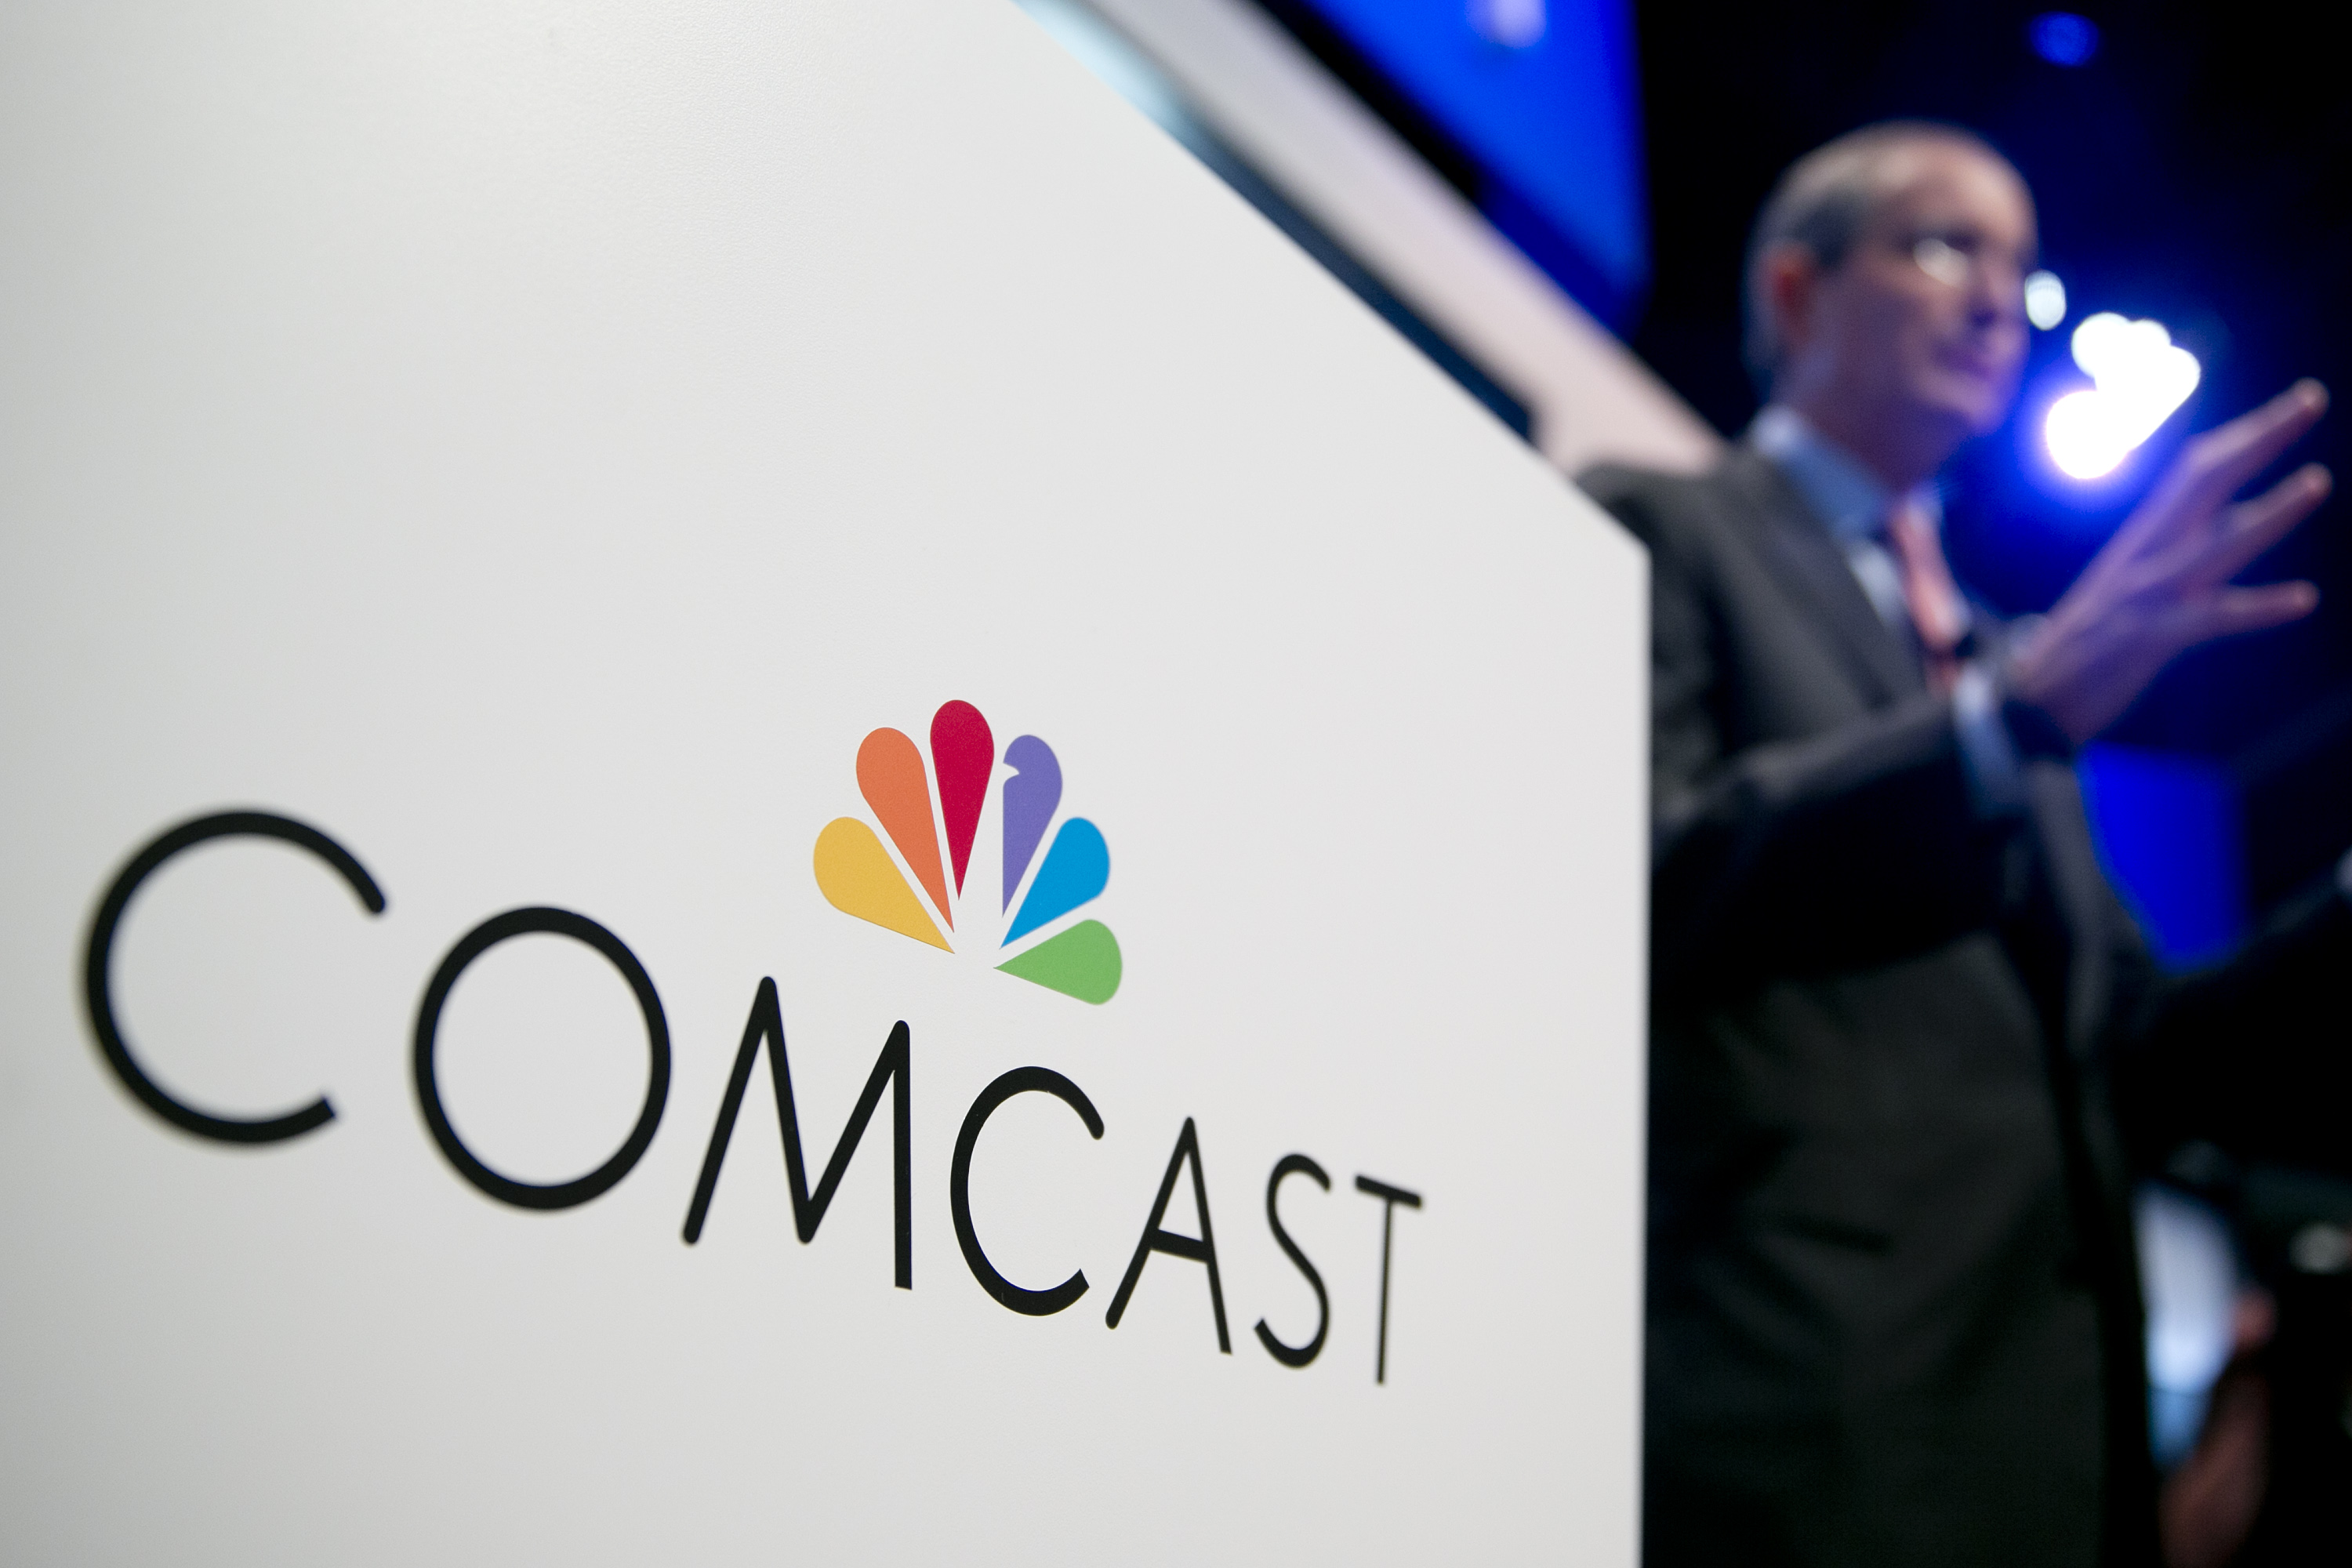 The Comcast Corp. logo is seen as Brian Roberts, chairman and chief executive officer of Comcast Corp. (R) speaks during a news conference in Washington on June 11, 2013.